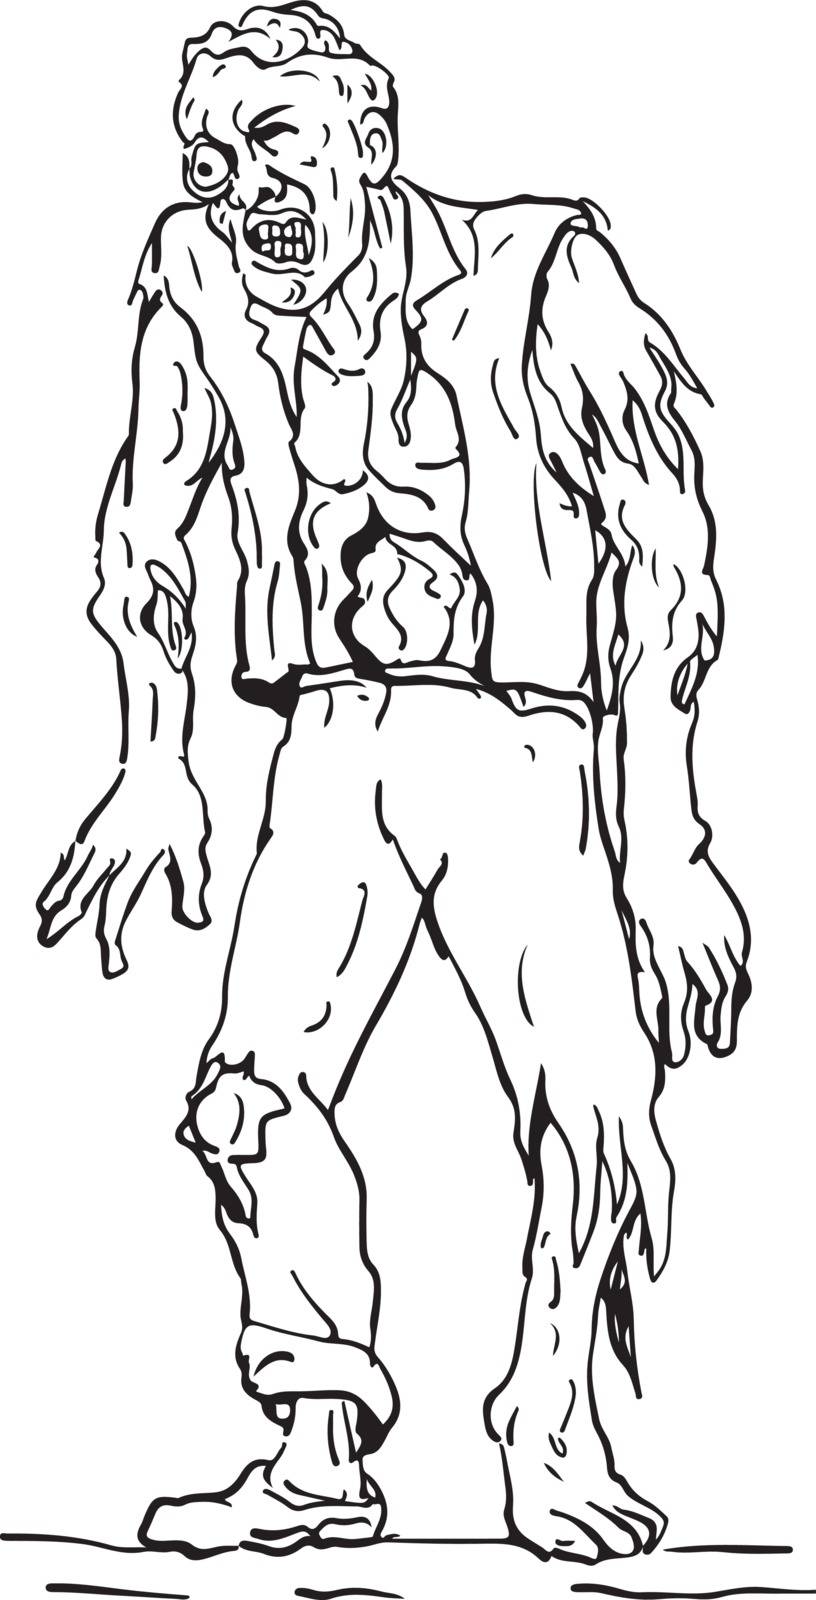 Drawing sketch style illustration of zombie, a fictional undead being created through the reanimation of a human corpse, walking viewed from front.